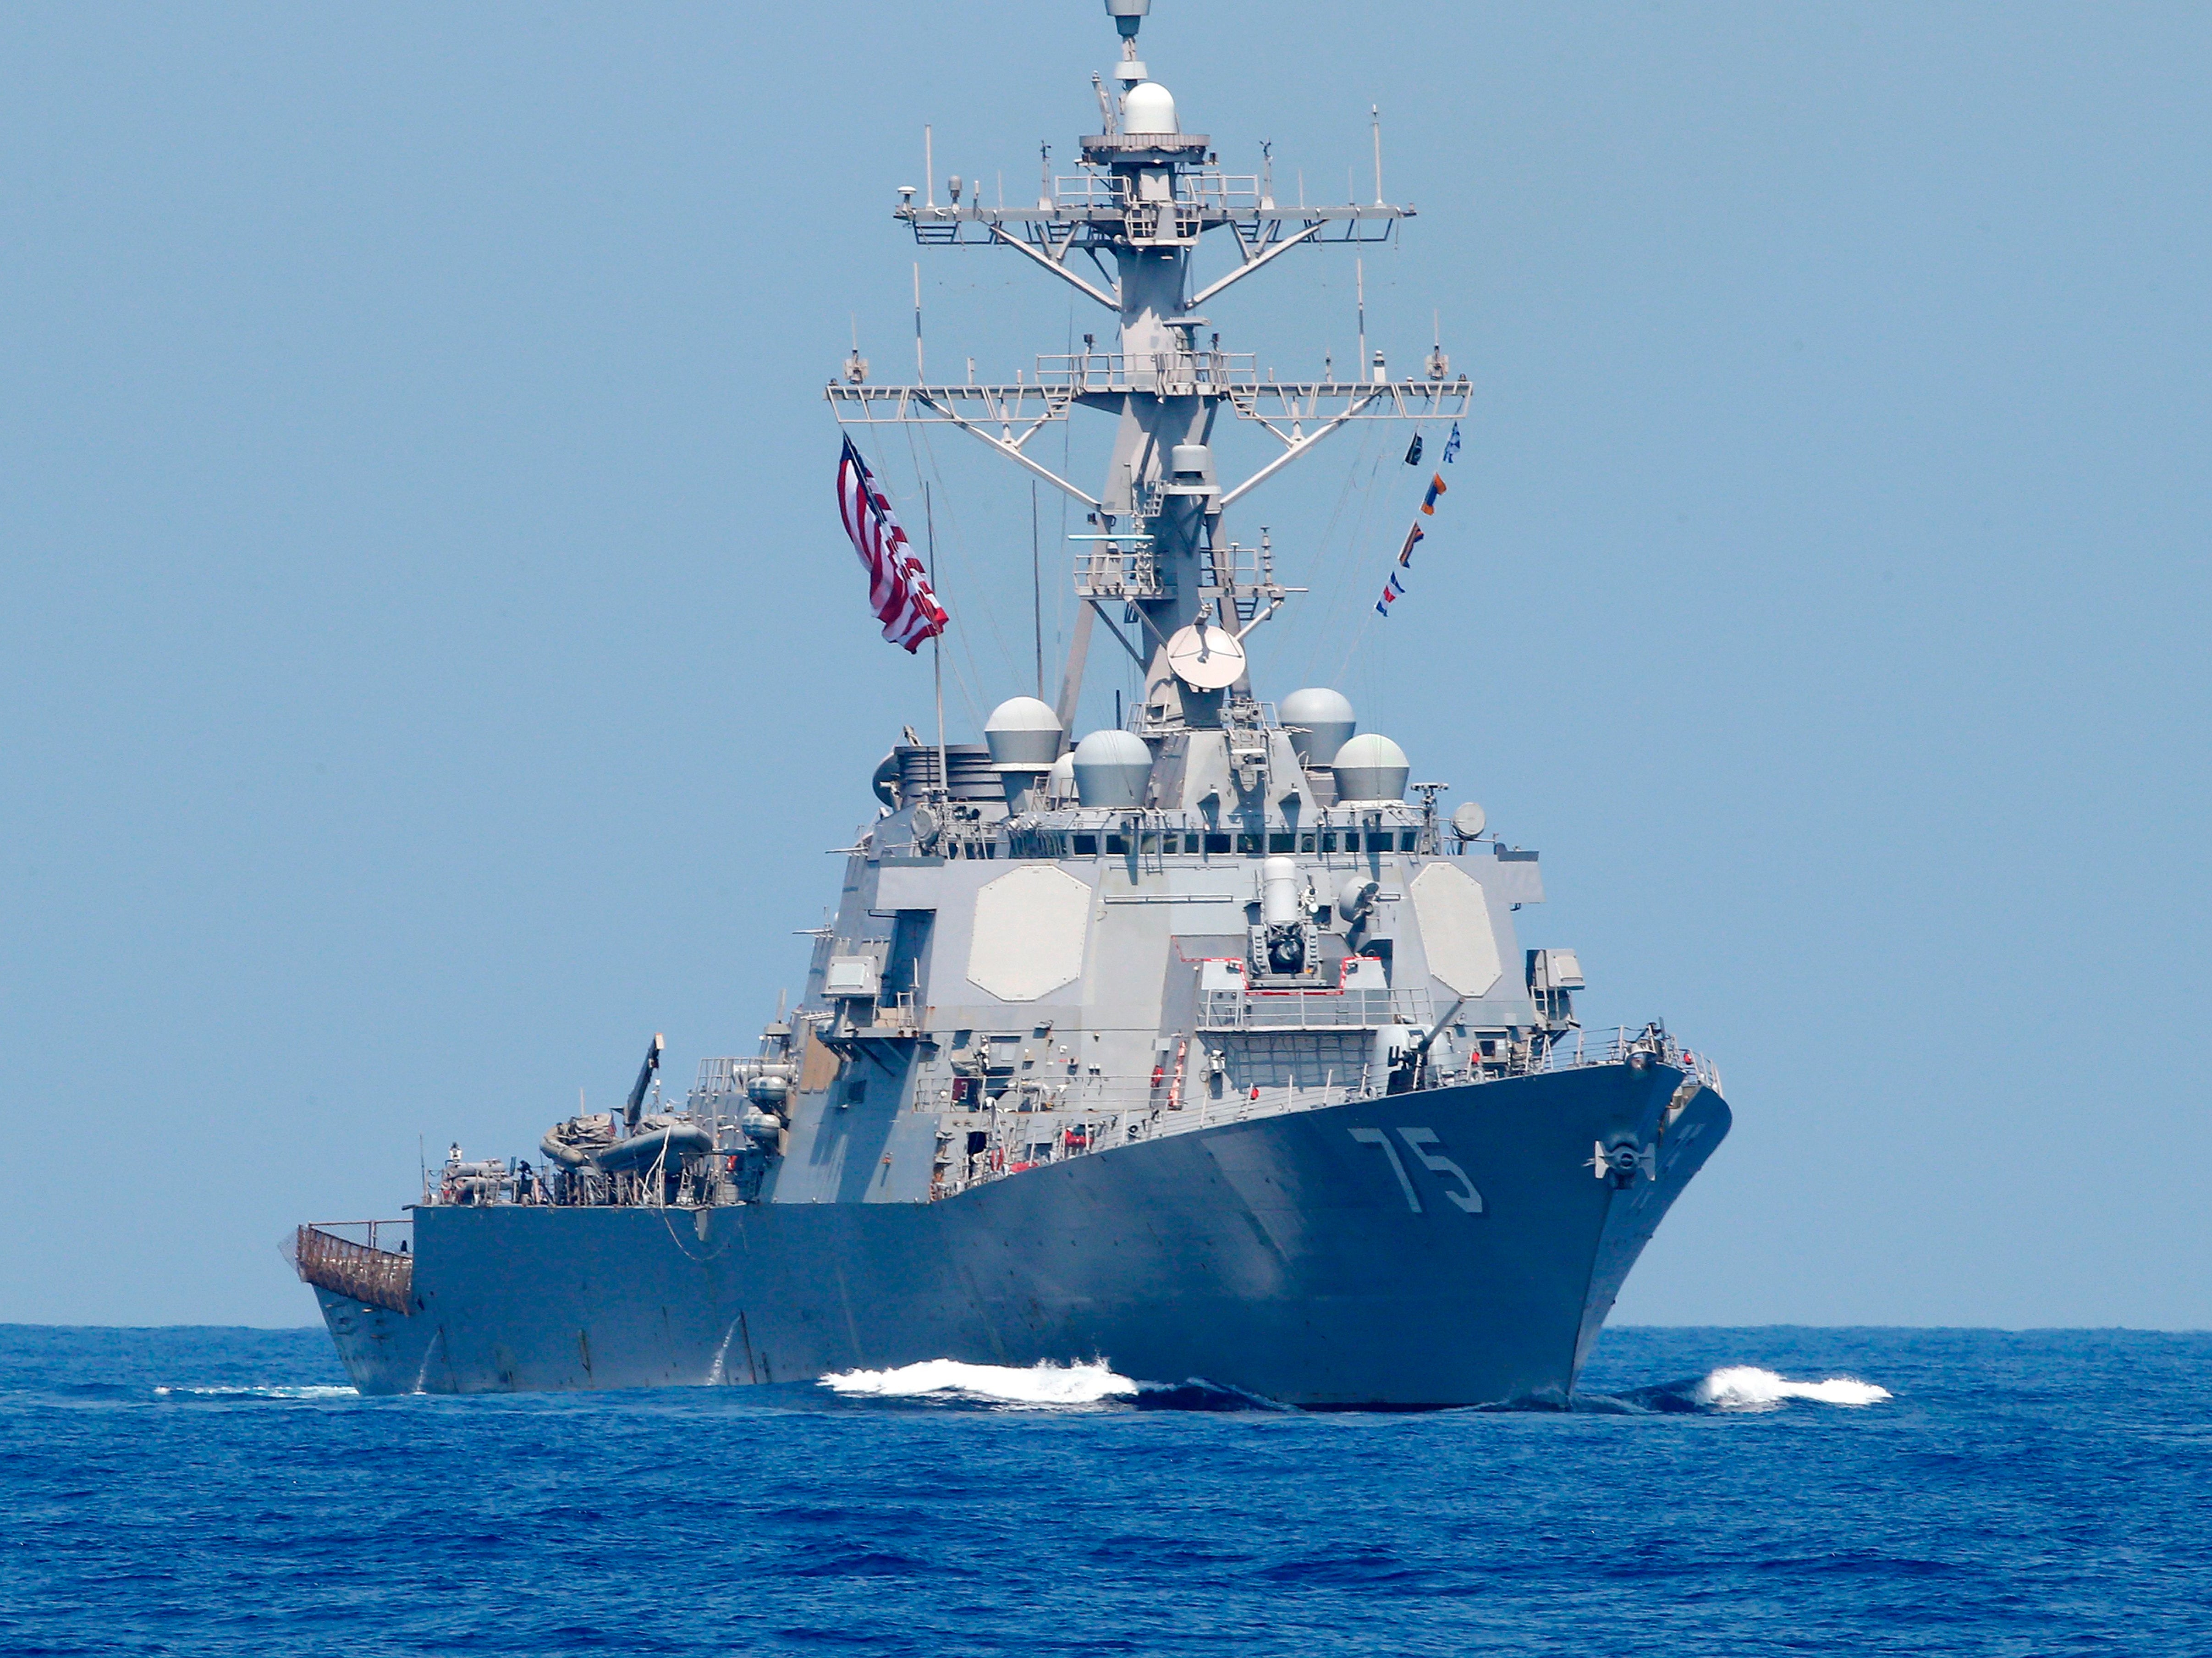 <p>A photo taken on 7 August 2019, shows the US Navy USS Donald Cook class guided missile destroyer during an exercise</p>